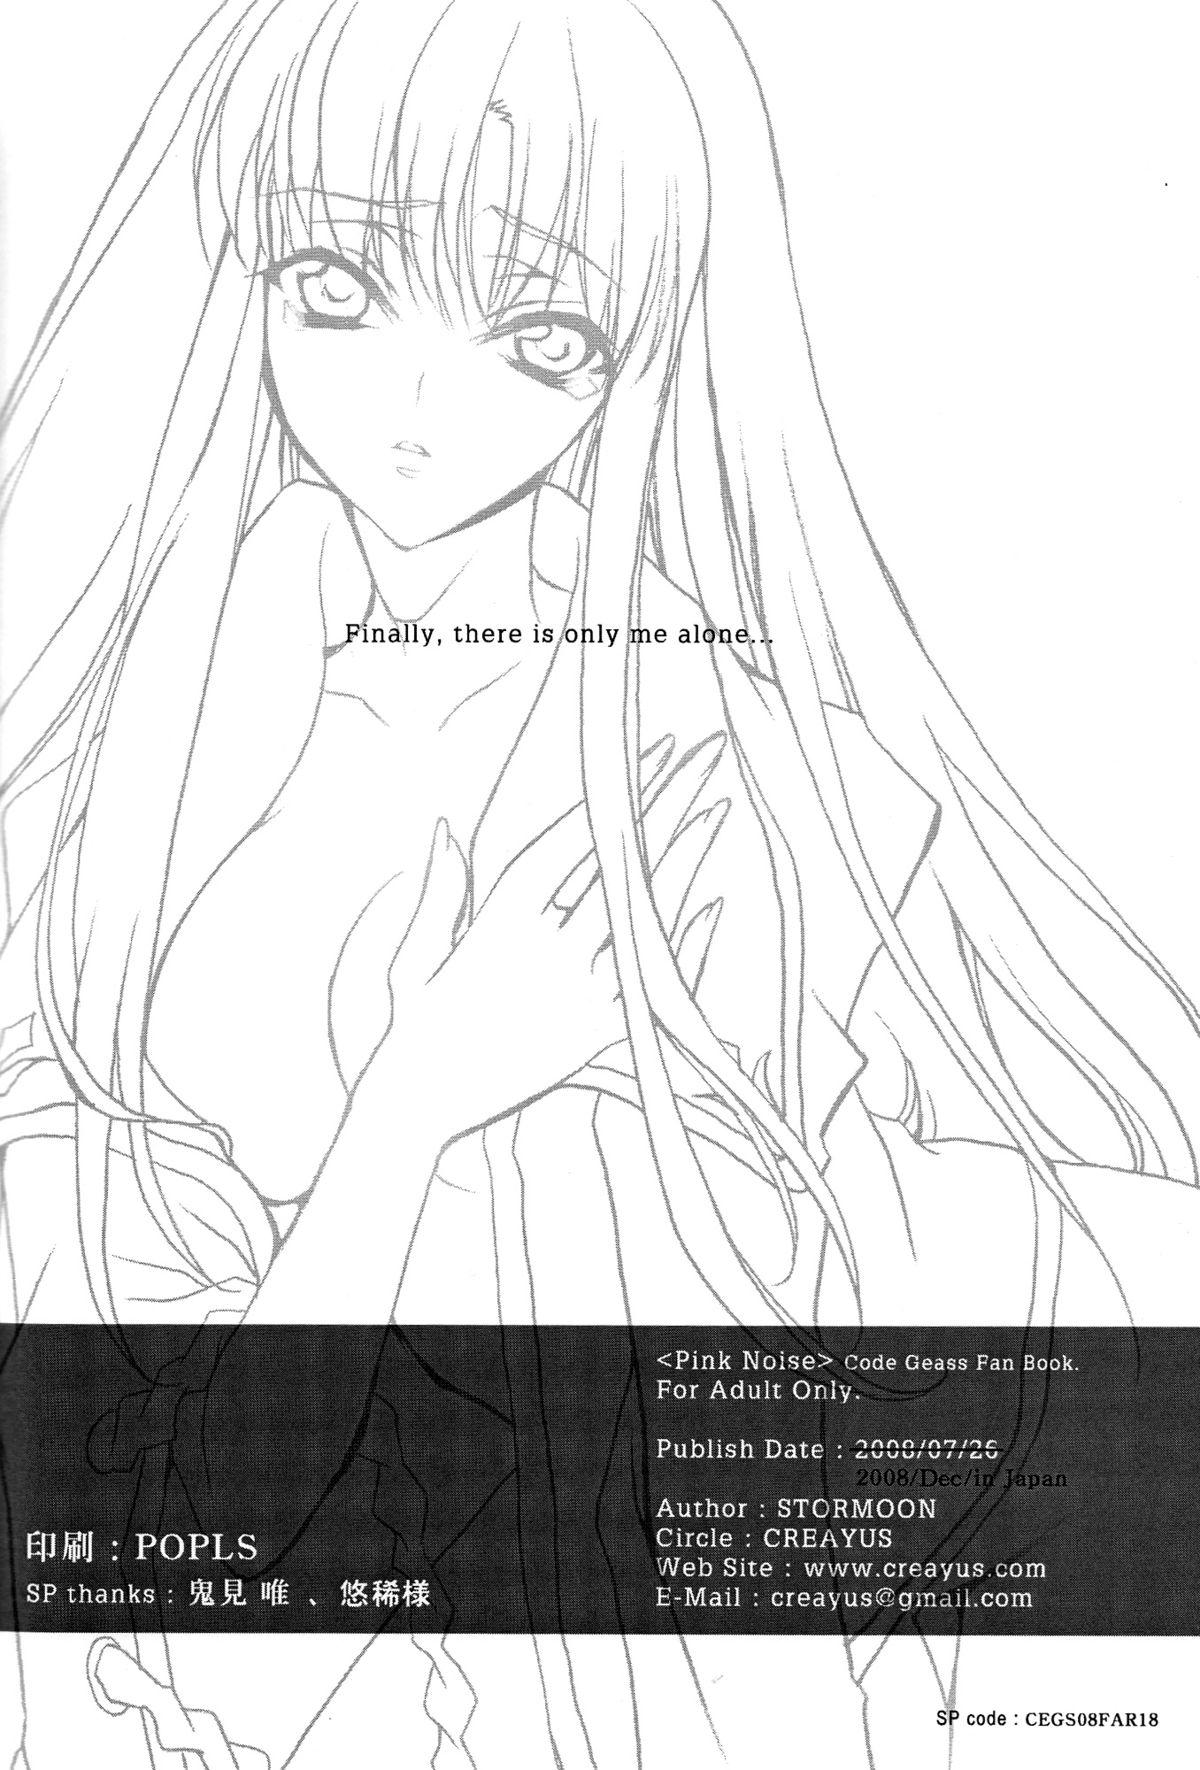 Bubble Butt Pink Noise - Code geass Nylons - Page 36